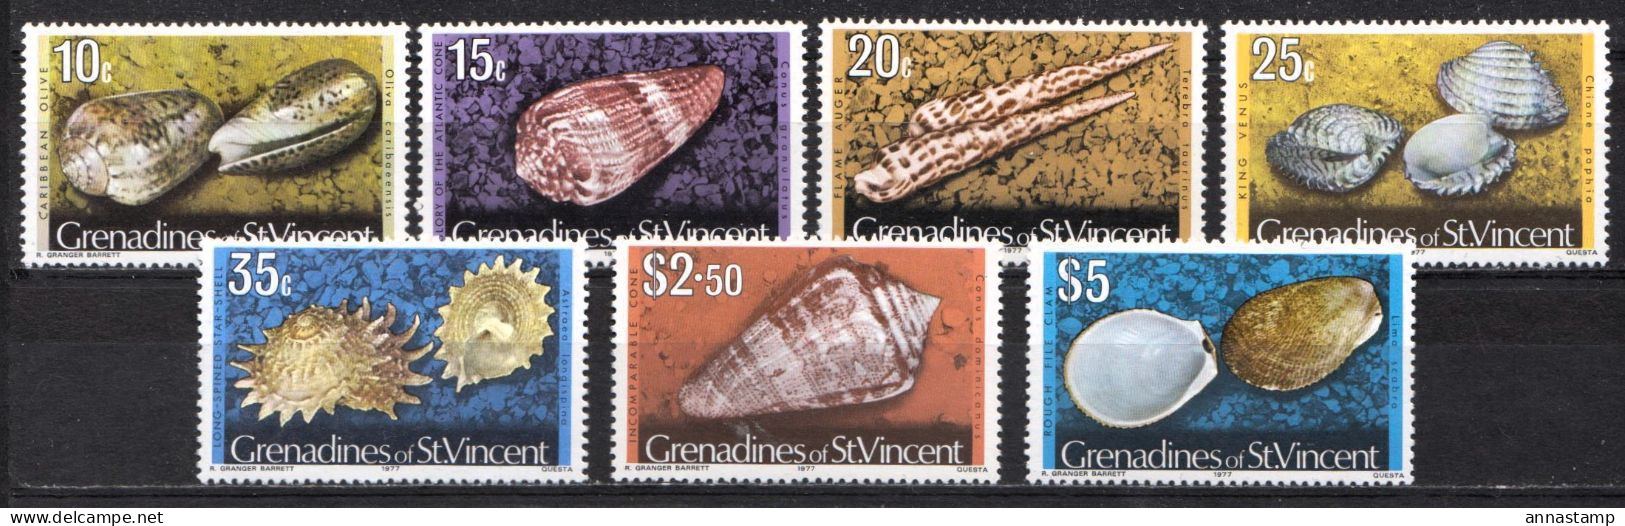 Grenadines Of St Vincent MNH Set, With Imprint Year 1977 - Muscheln